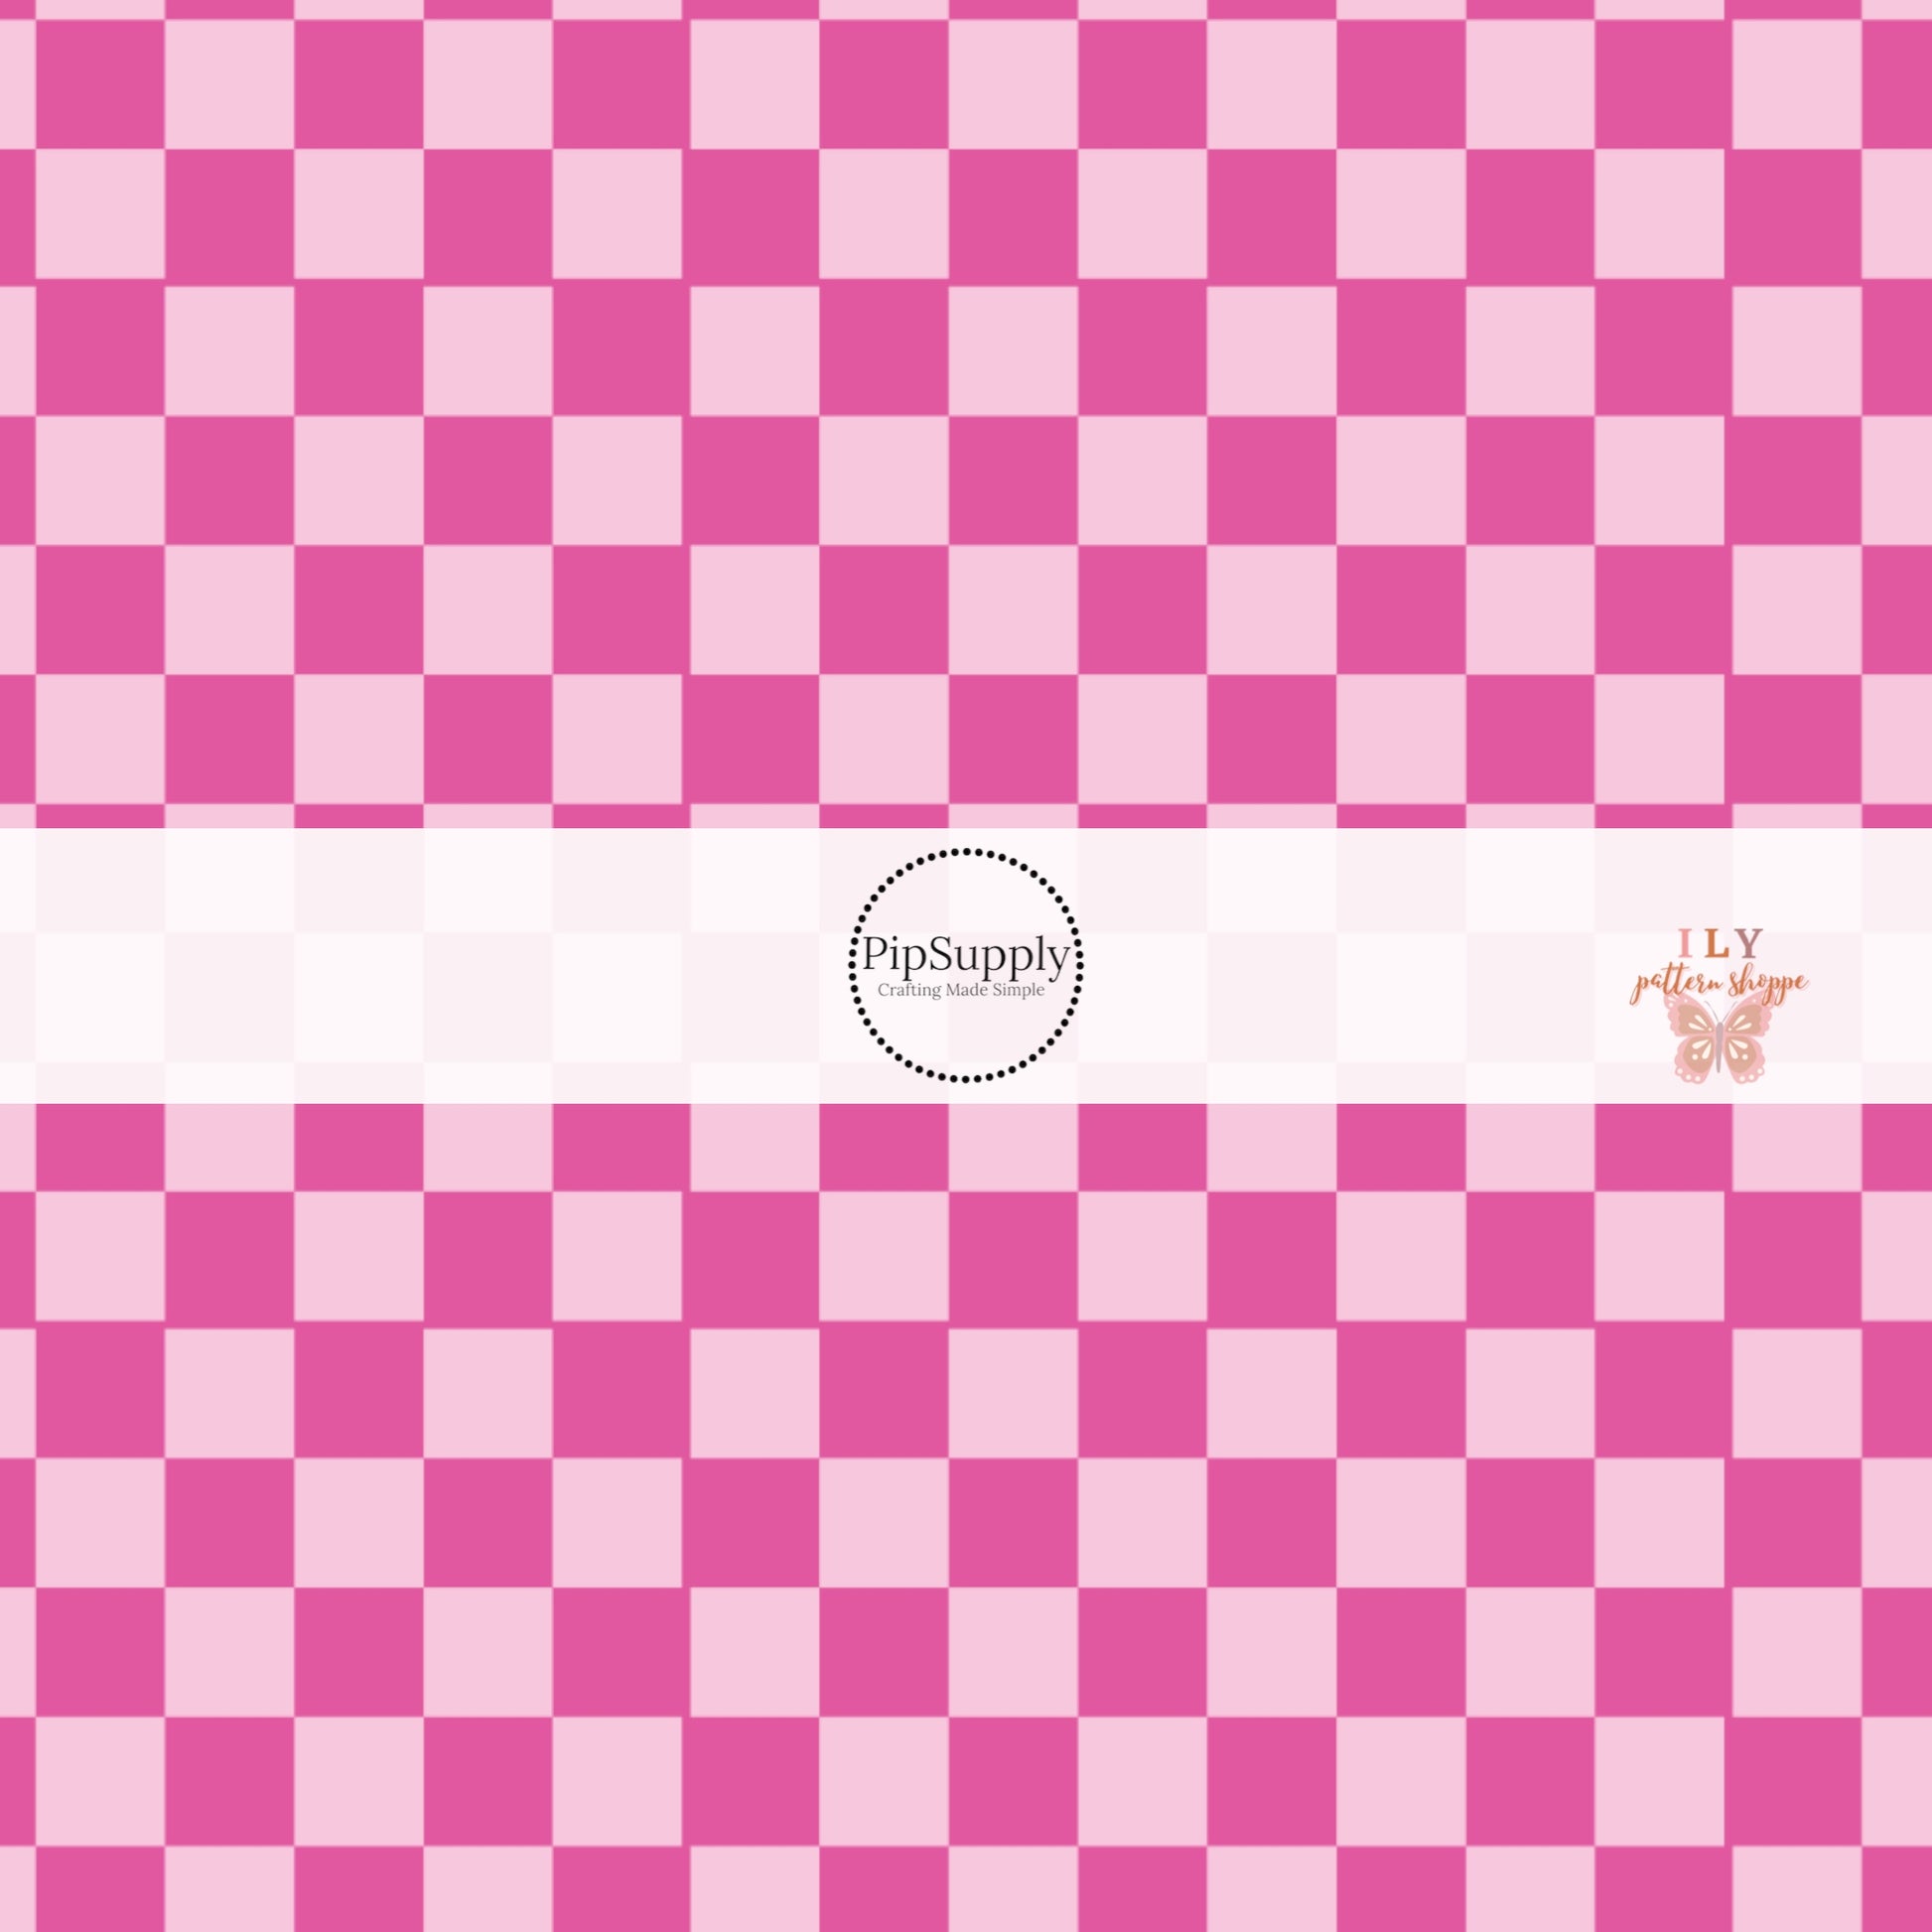 Hot pink tiles on light pink checkered bow strips